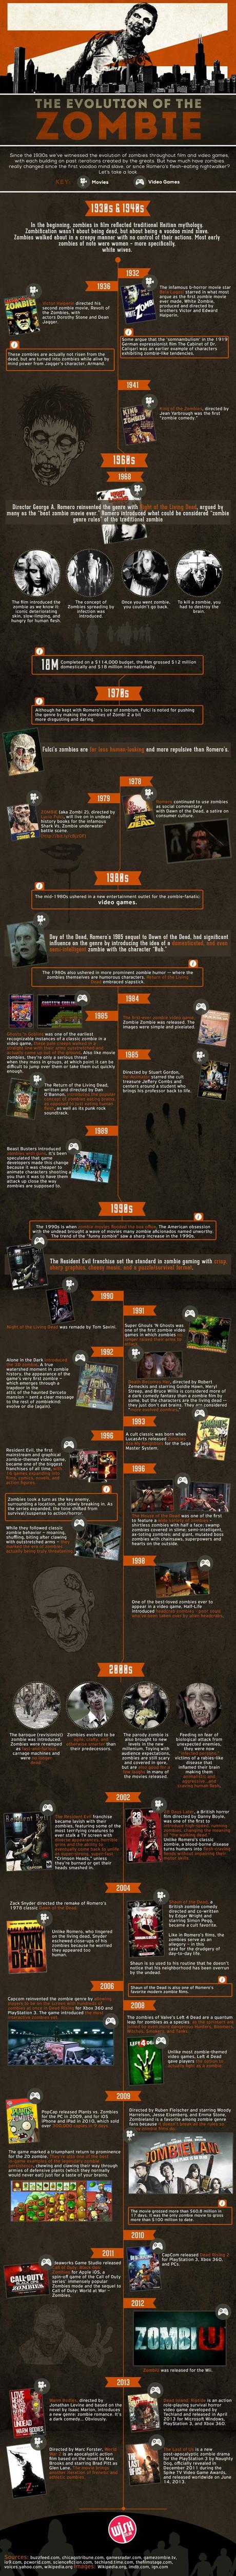 The Evolution of the Zombie {Infographic}